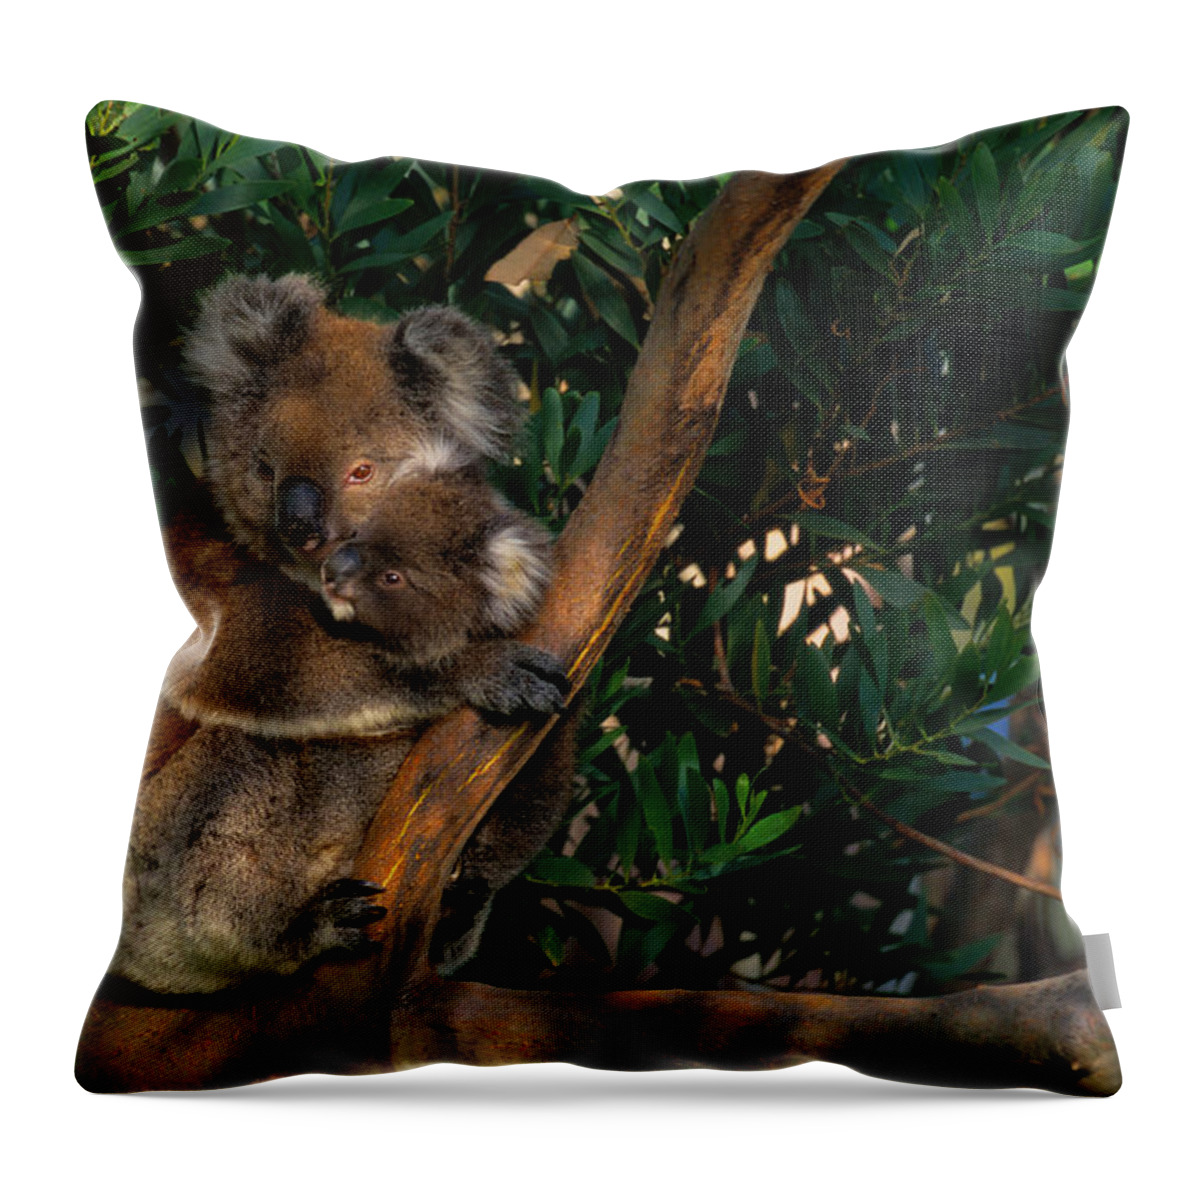 Oceania Throw Pillow featuring the photograph Koala Phascolarctos Cinereus And Baby by Art Wolfe